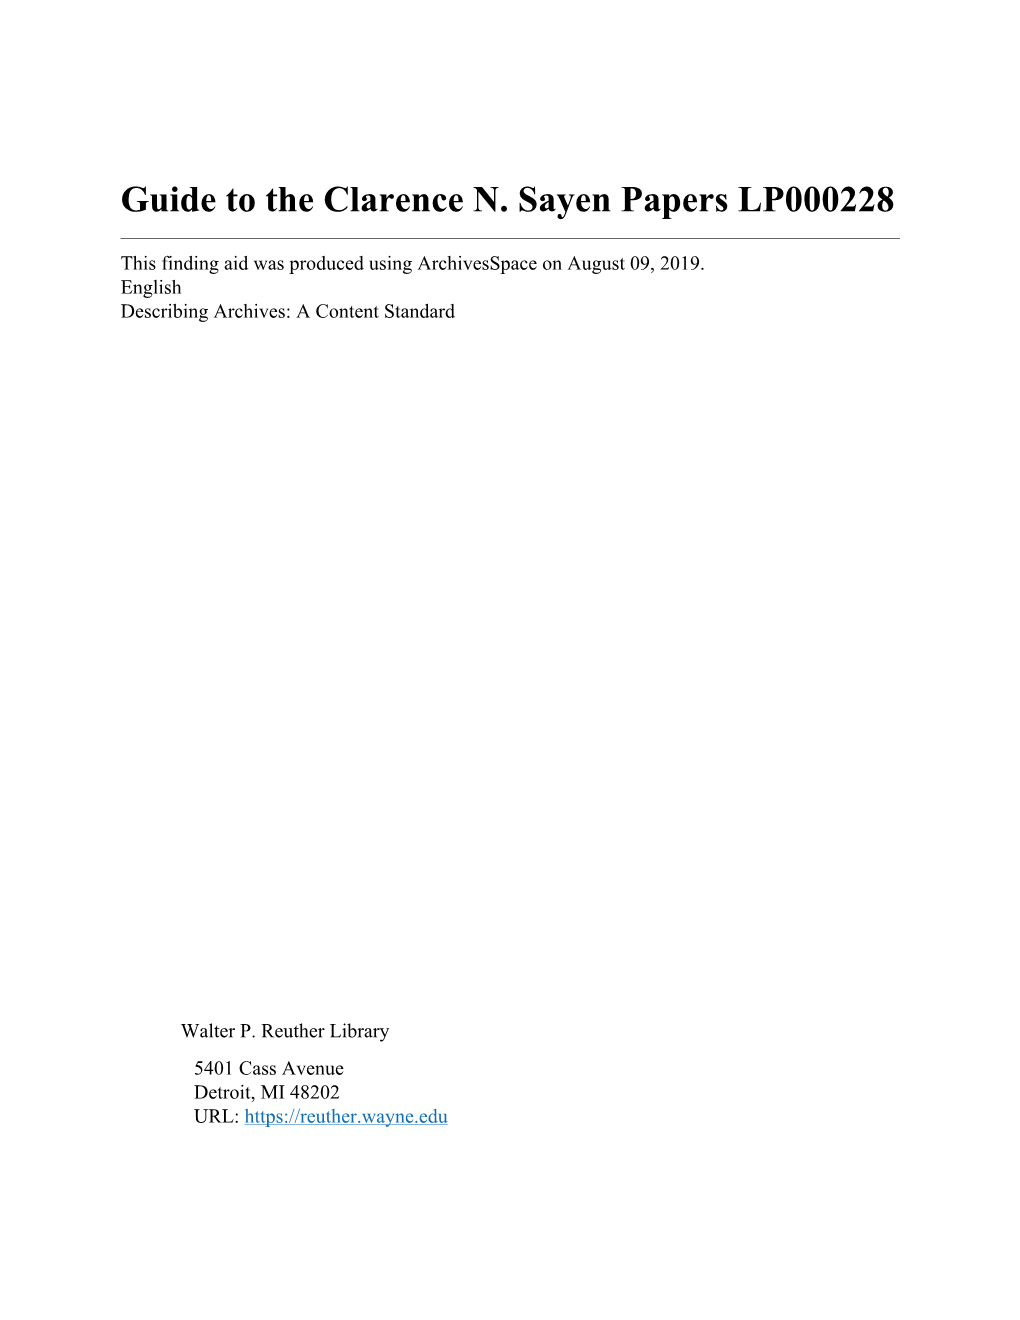 Guide to the Clarence N. Sayen Papers LP000228